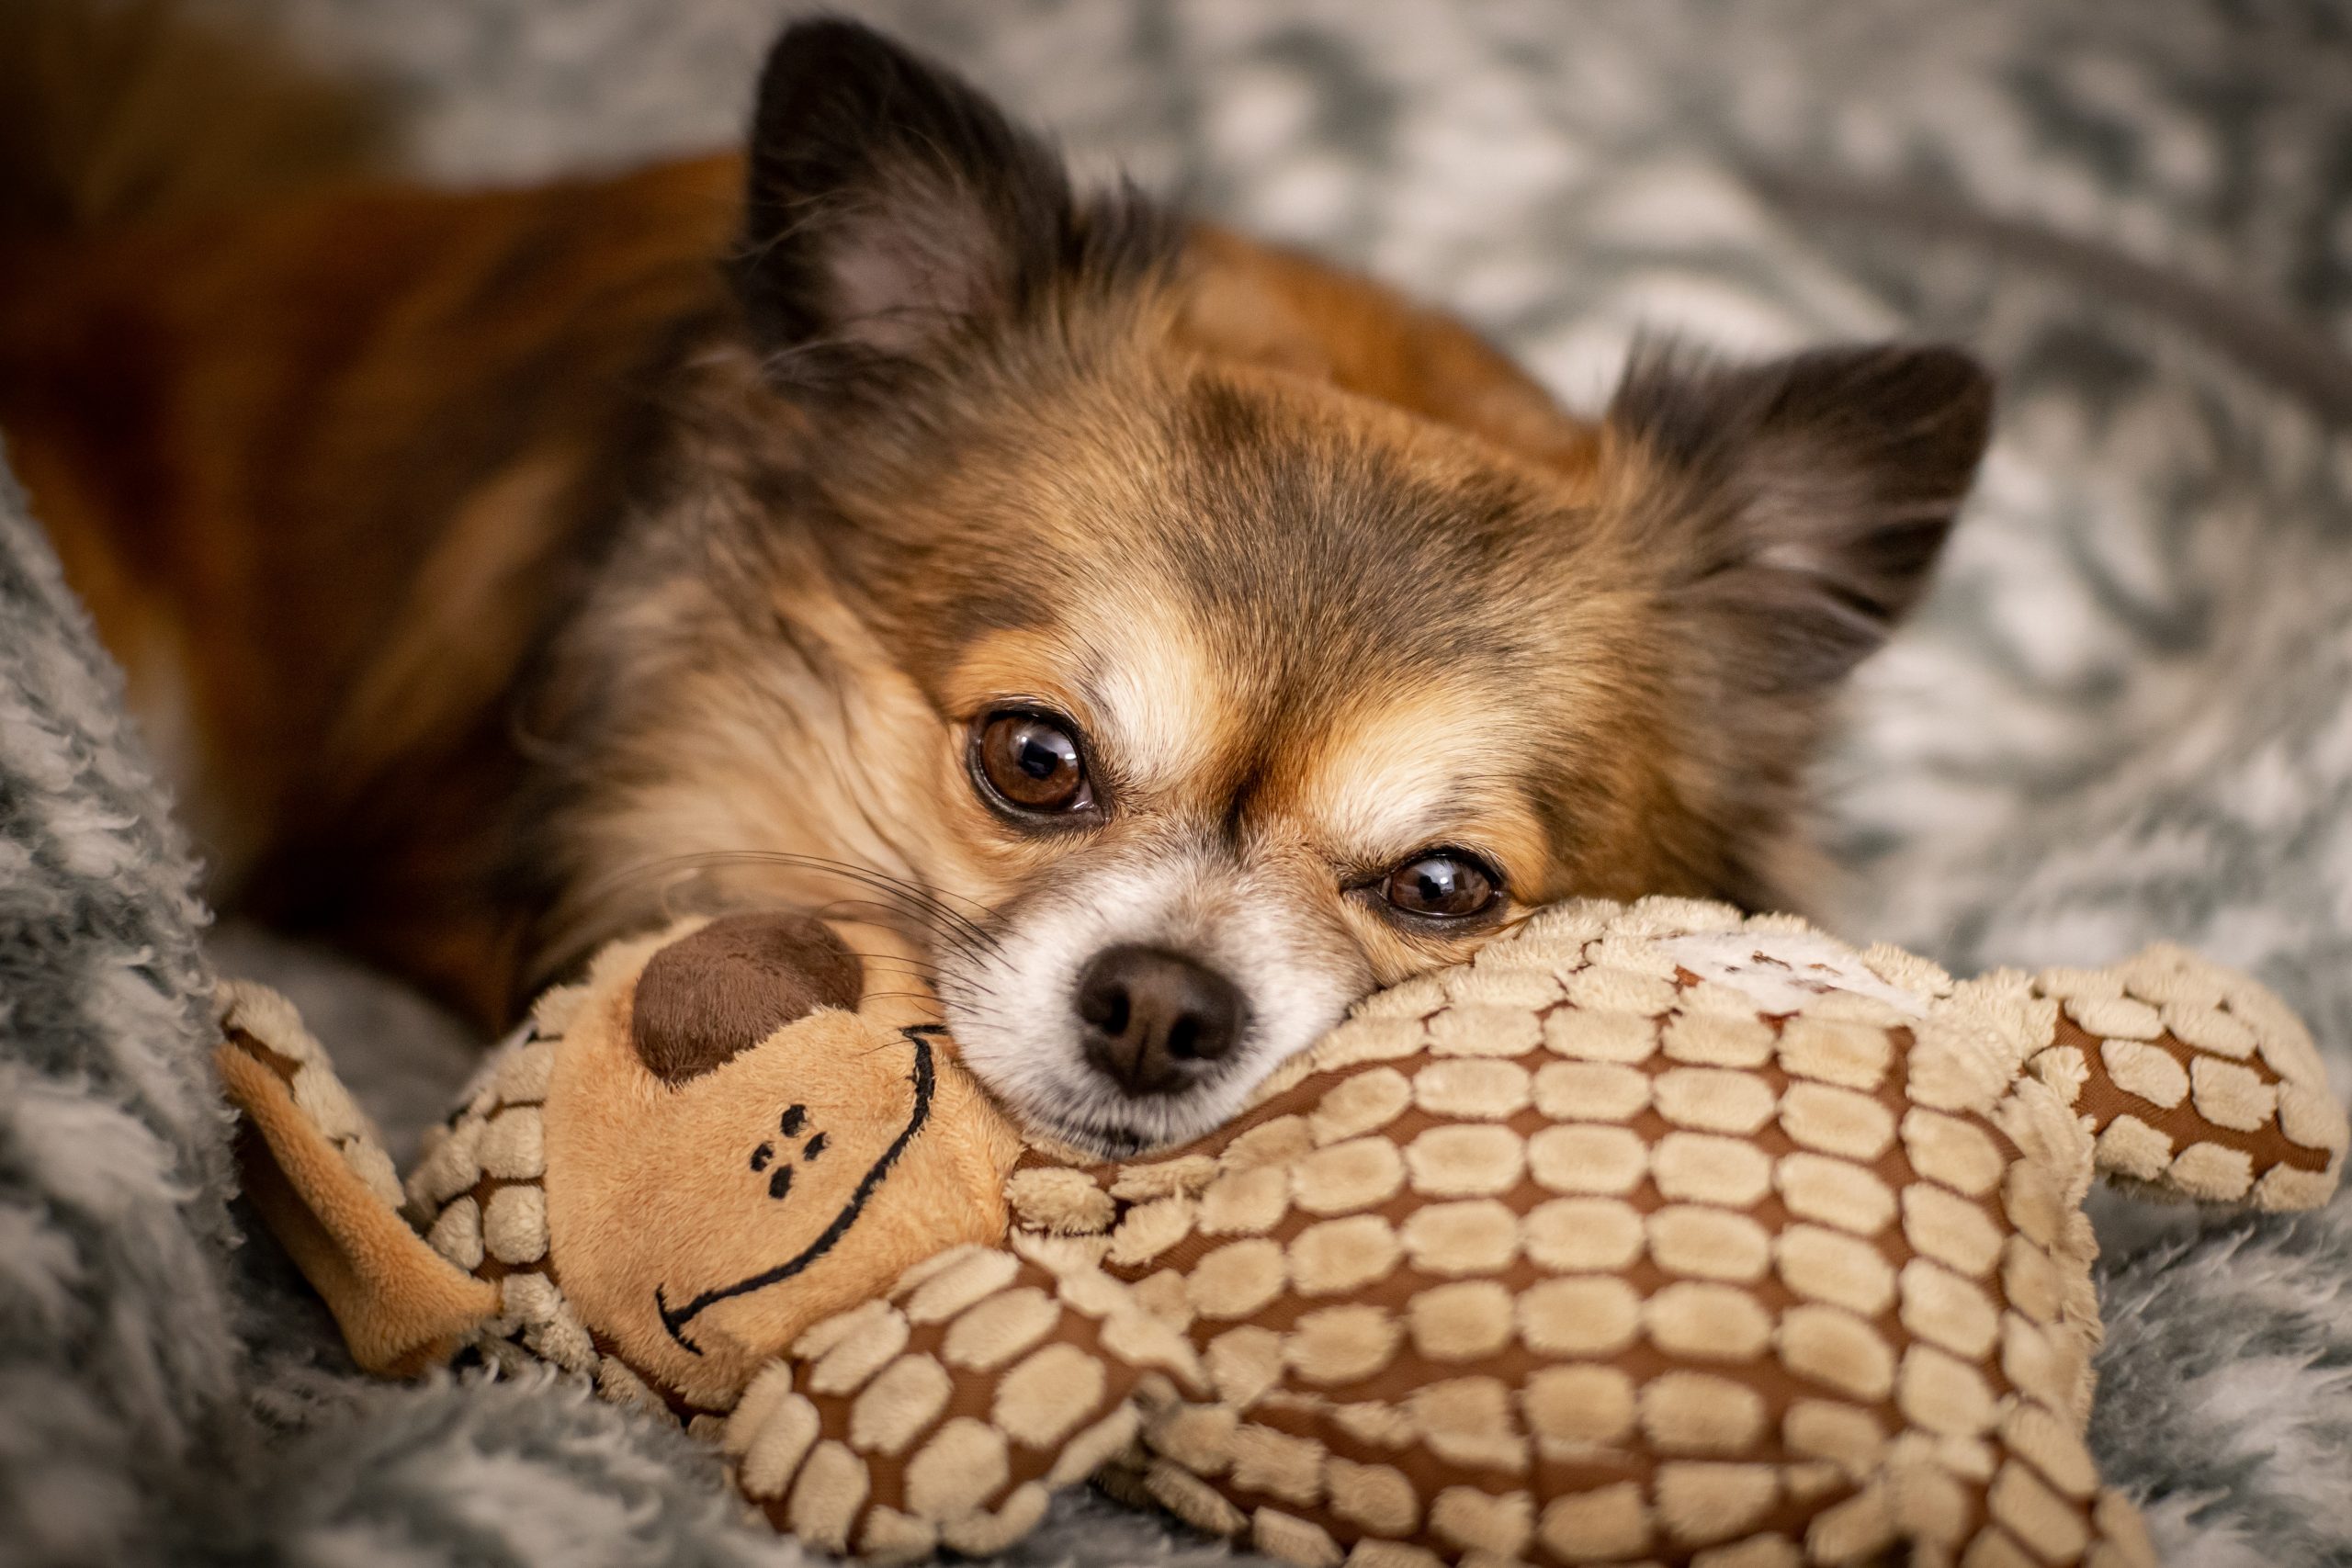 Chihuahua Adoption: Why Adoption is the Best Choice